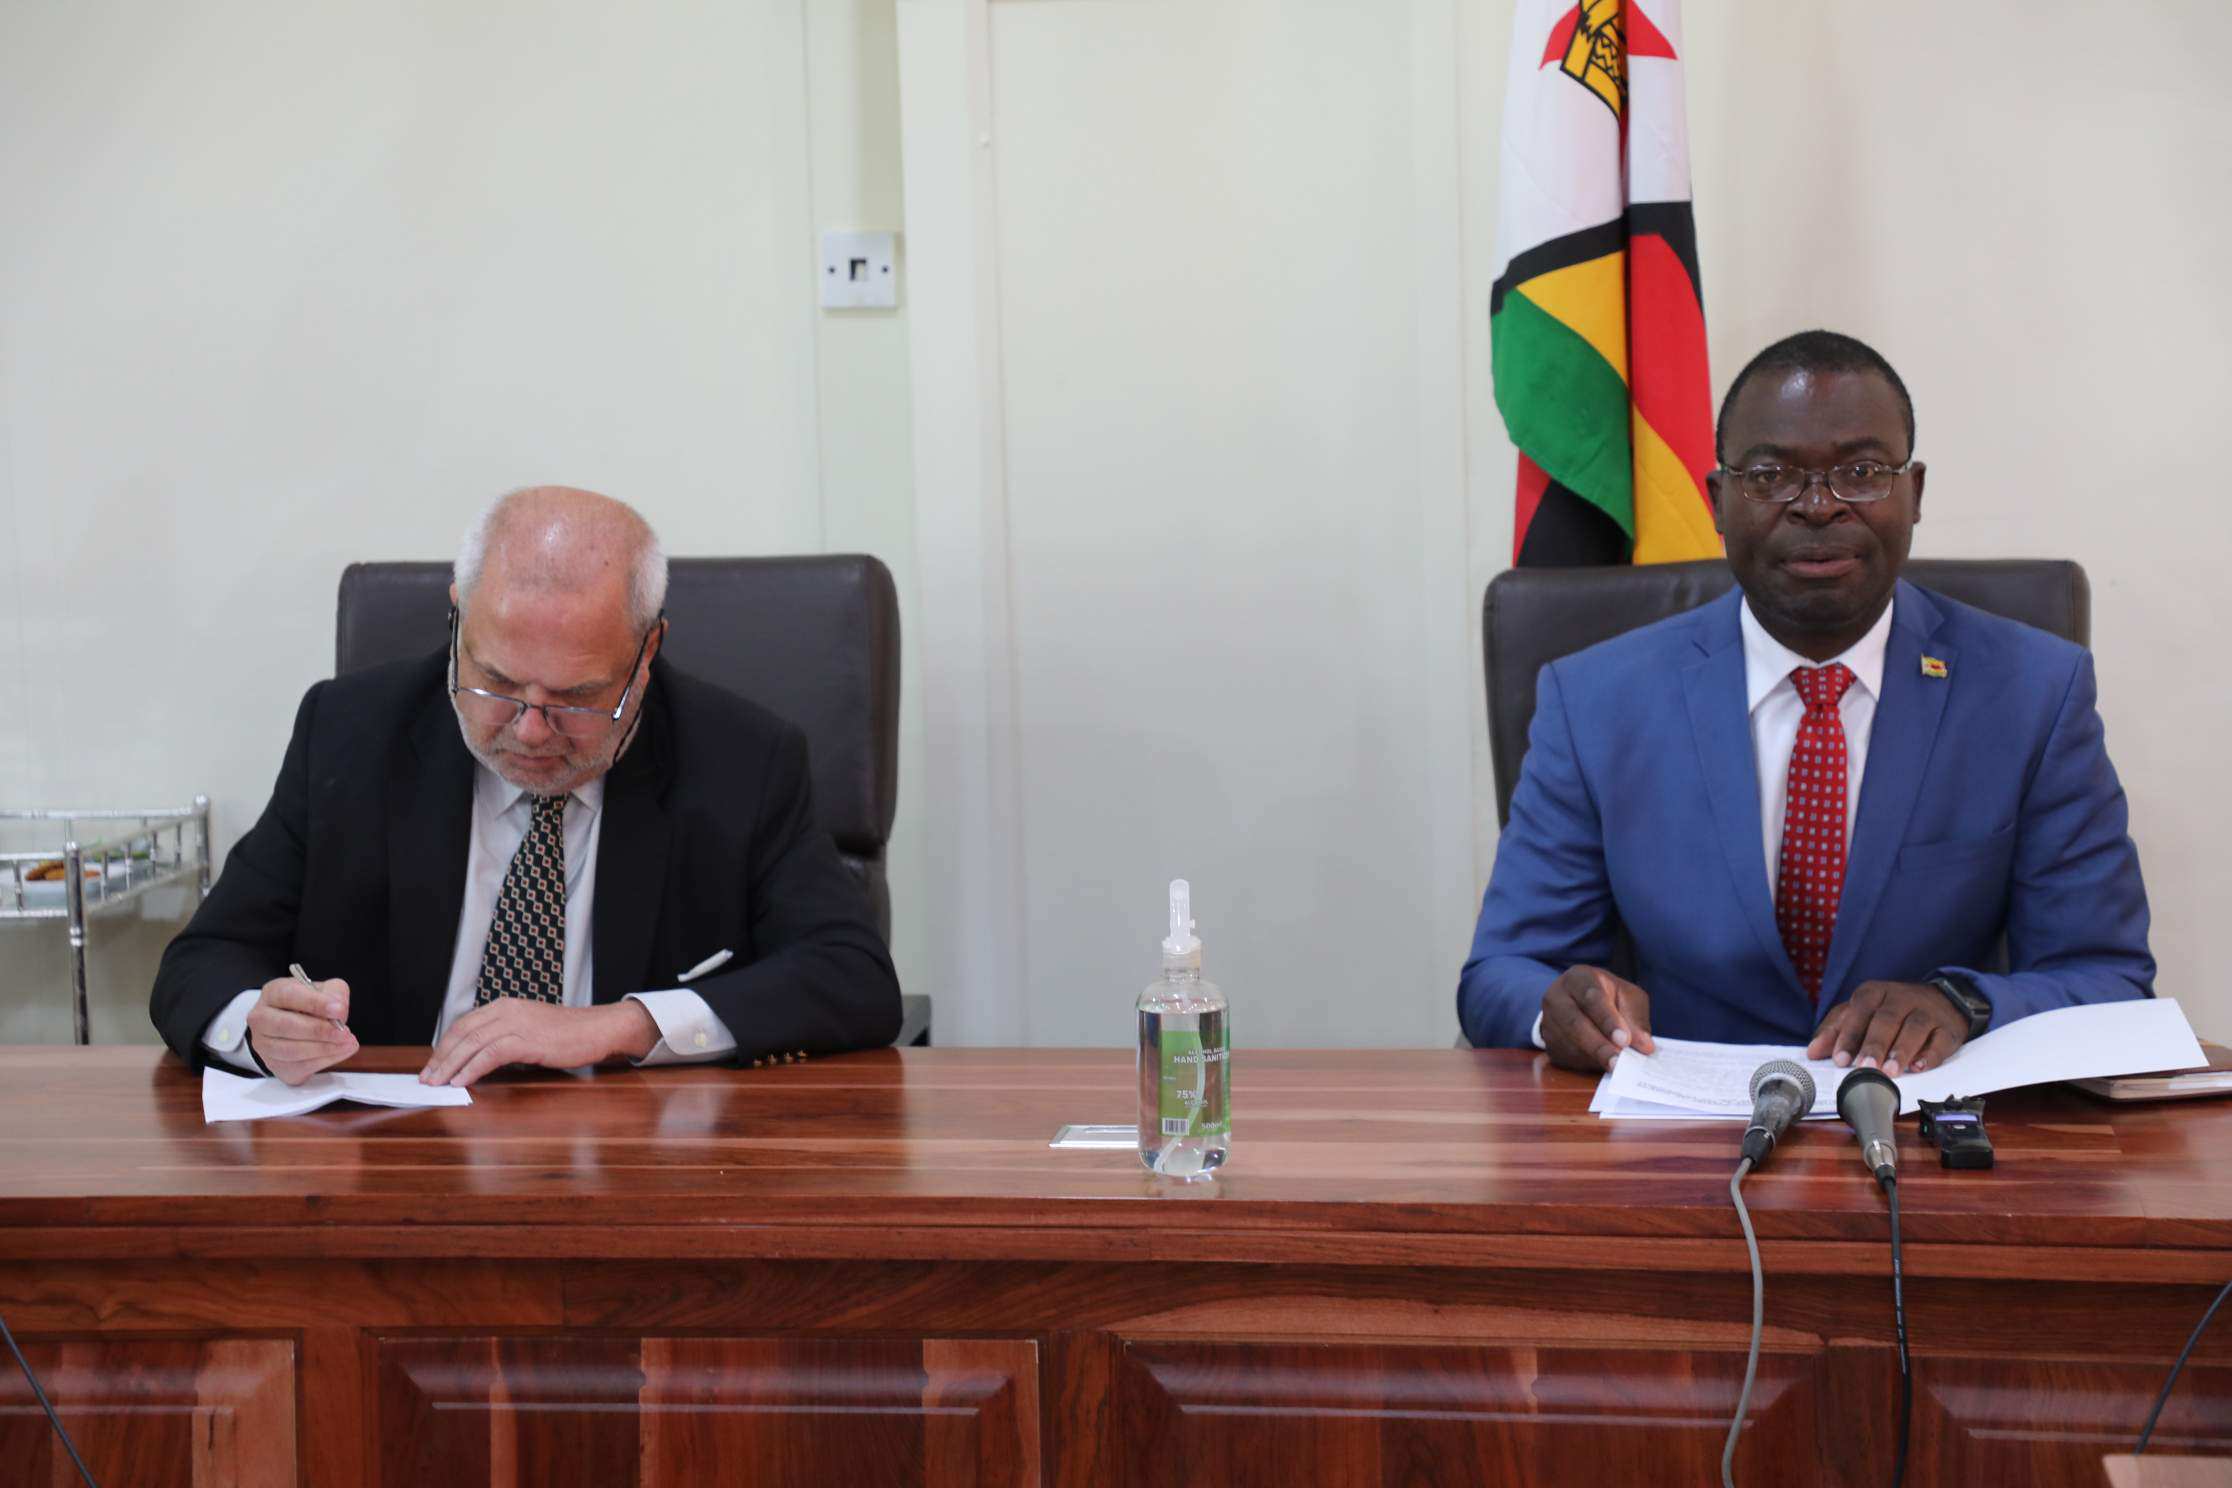 2023 Elections: Minister Murwira meets EU Electoral Observation Mission